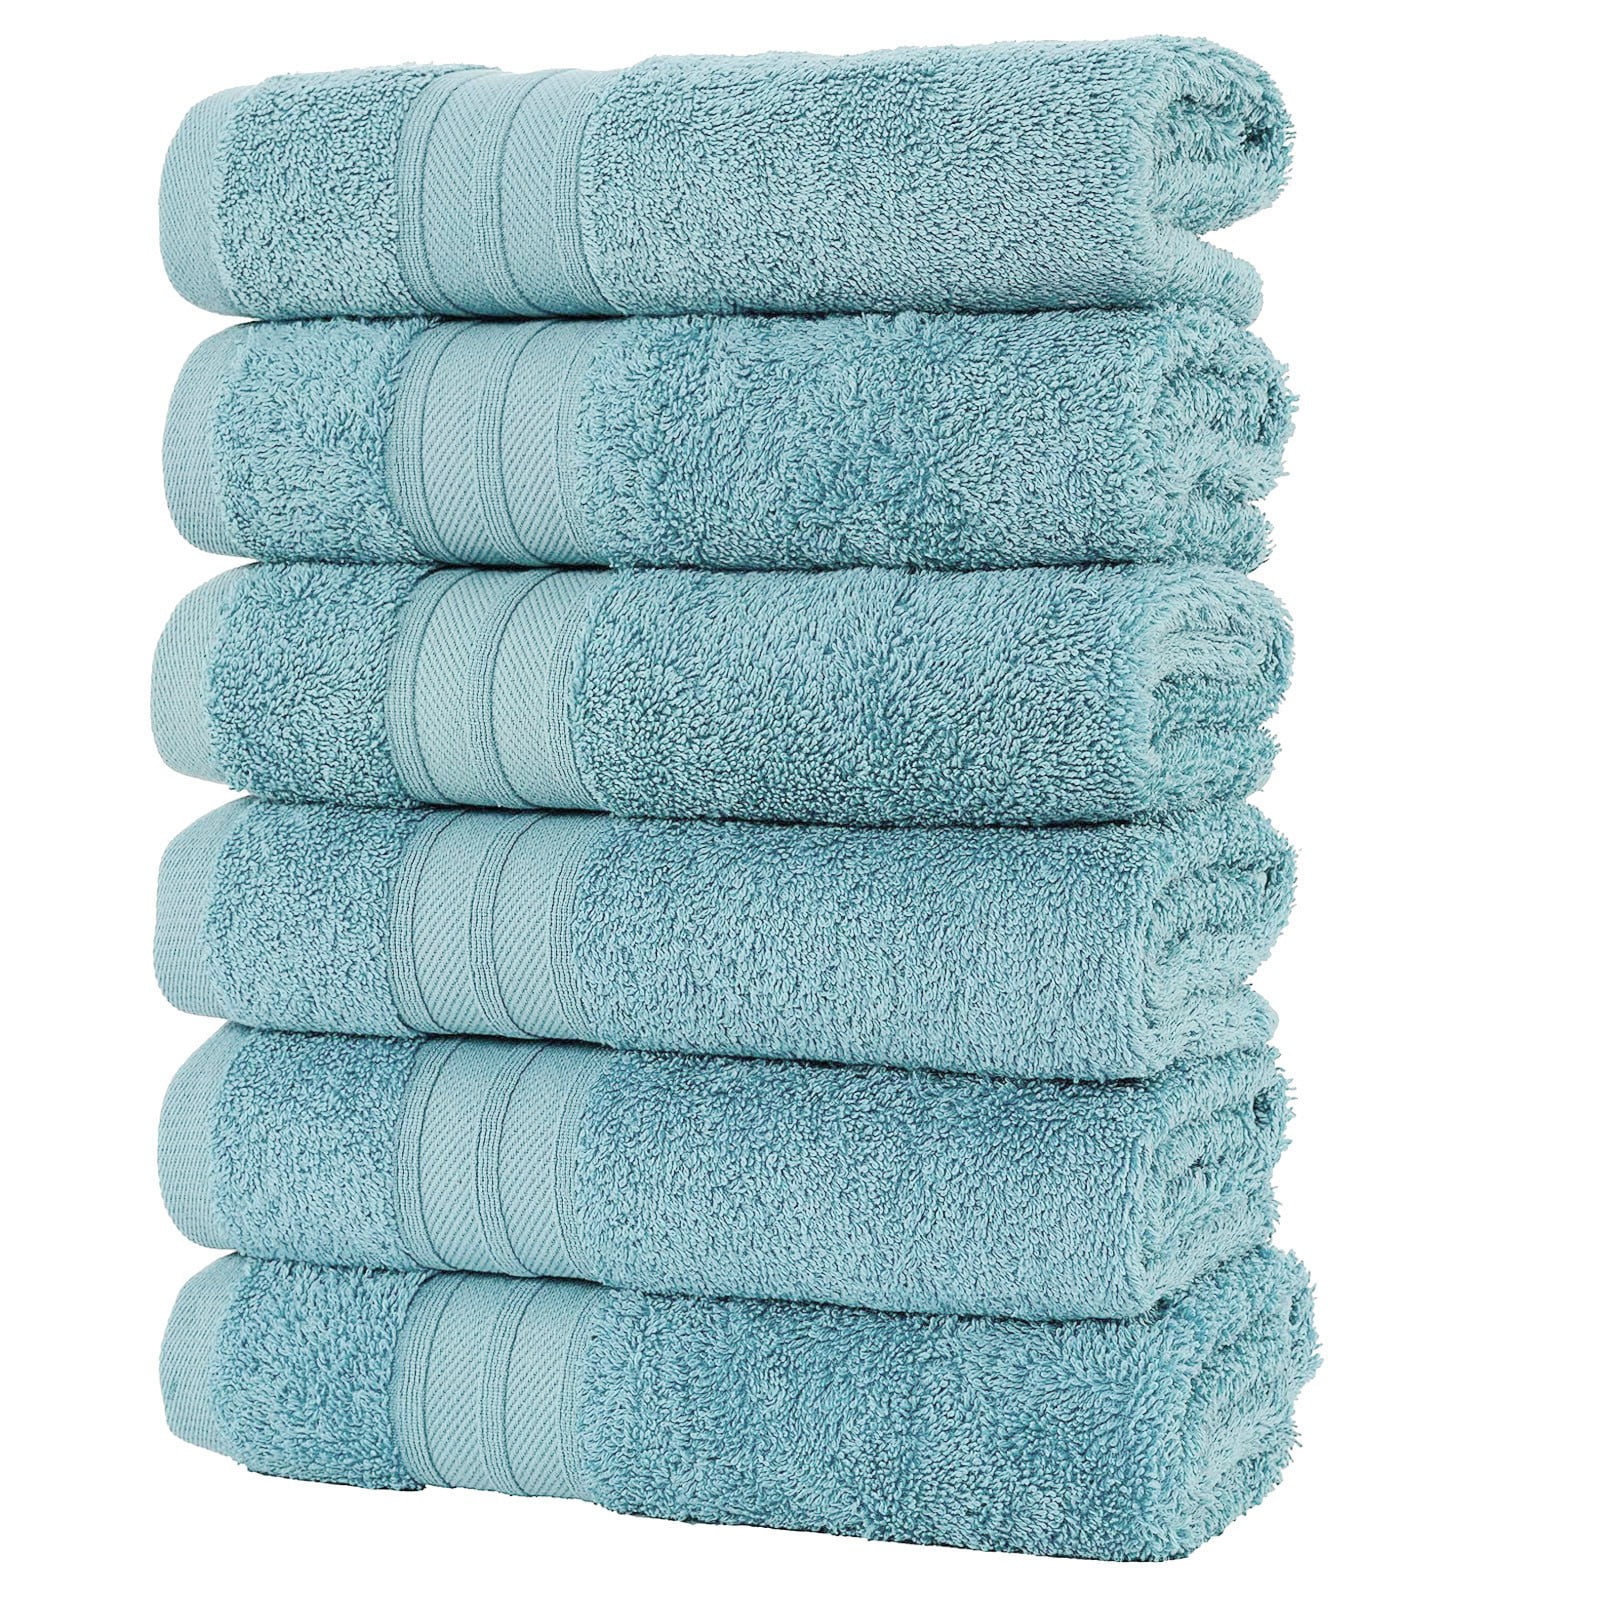 Details about   4 Pack 100% Cotton Washcloths Extra Soft Absorbent Quick Drying Fingertip Towel 